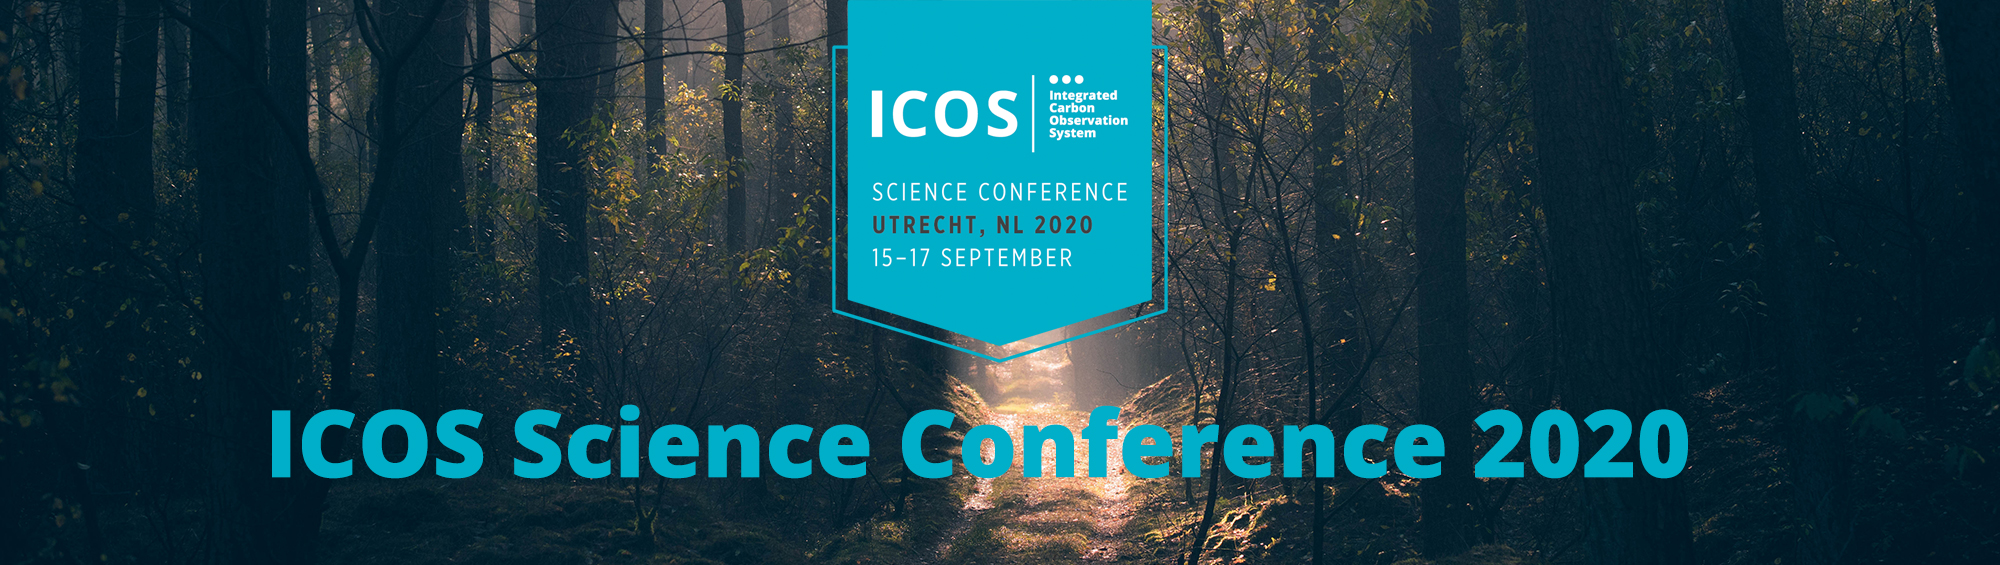 ICOS Science Conference banner